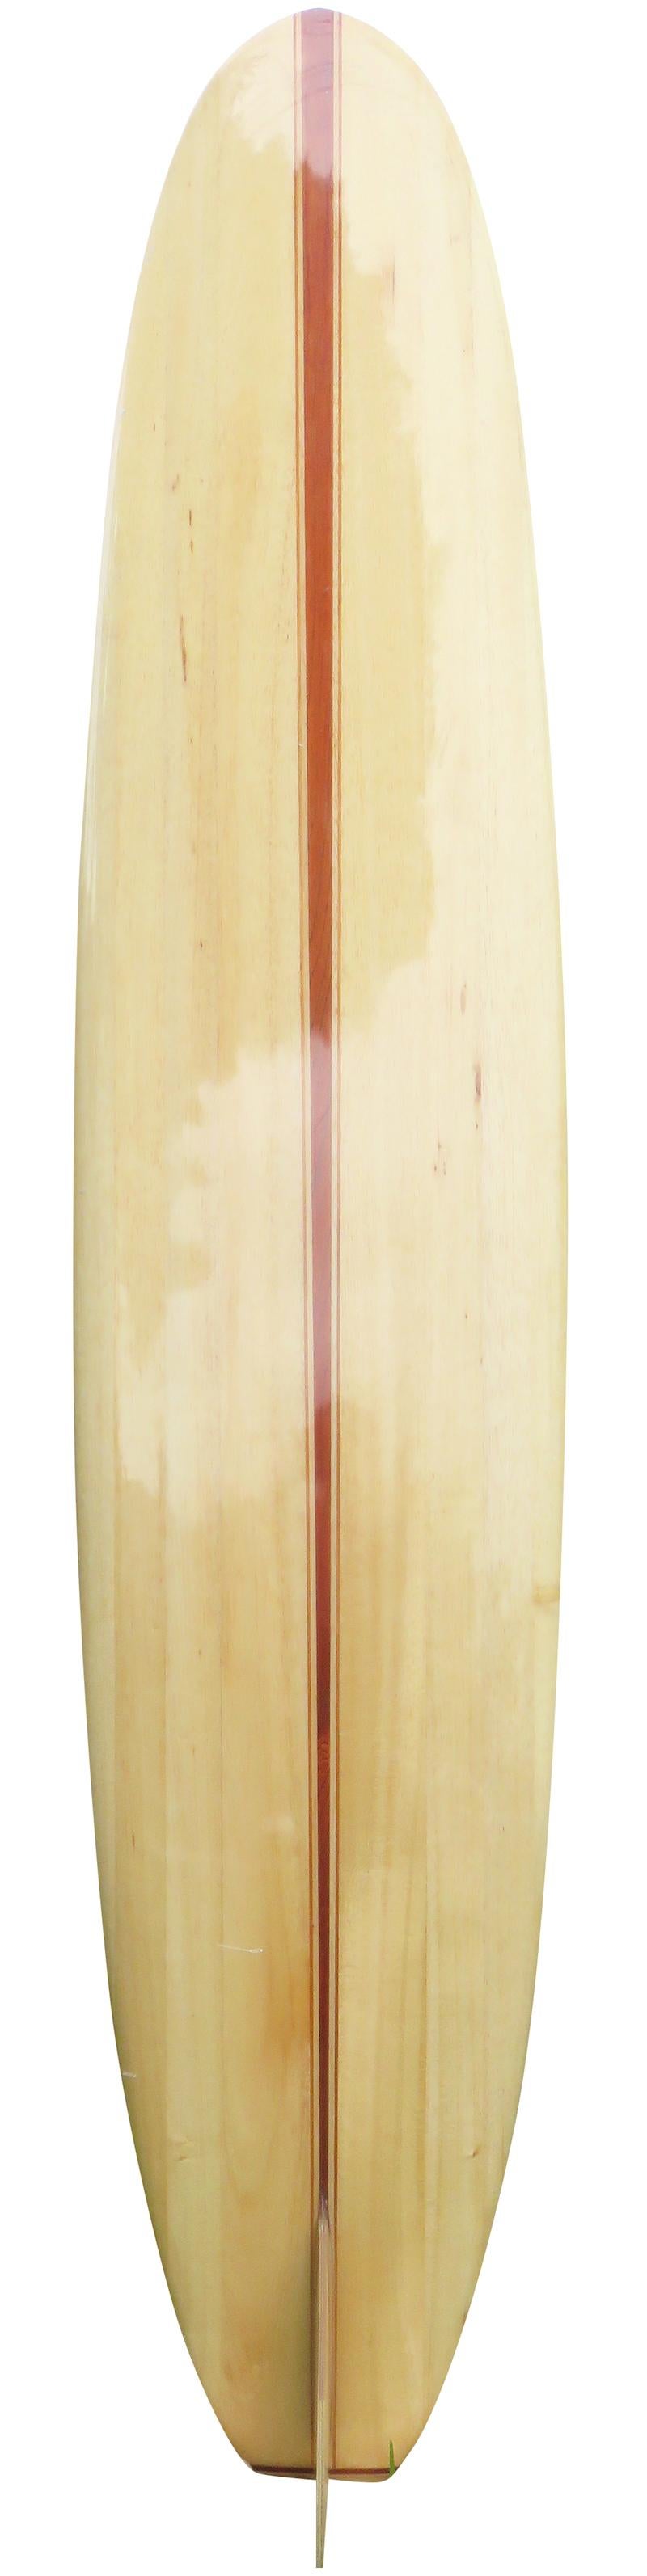 Early 2000s Velzy balsawood longboard shaped by the late Dale Velzy (1927-2005). Features a triple redwood stringer design with beautiful balsawood and redwood 